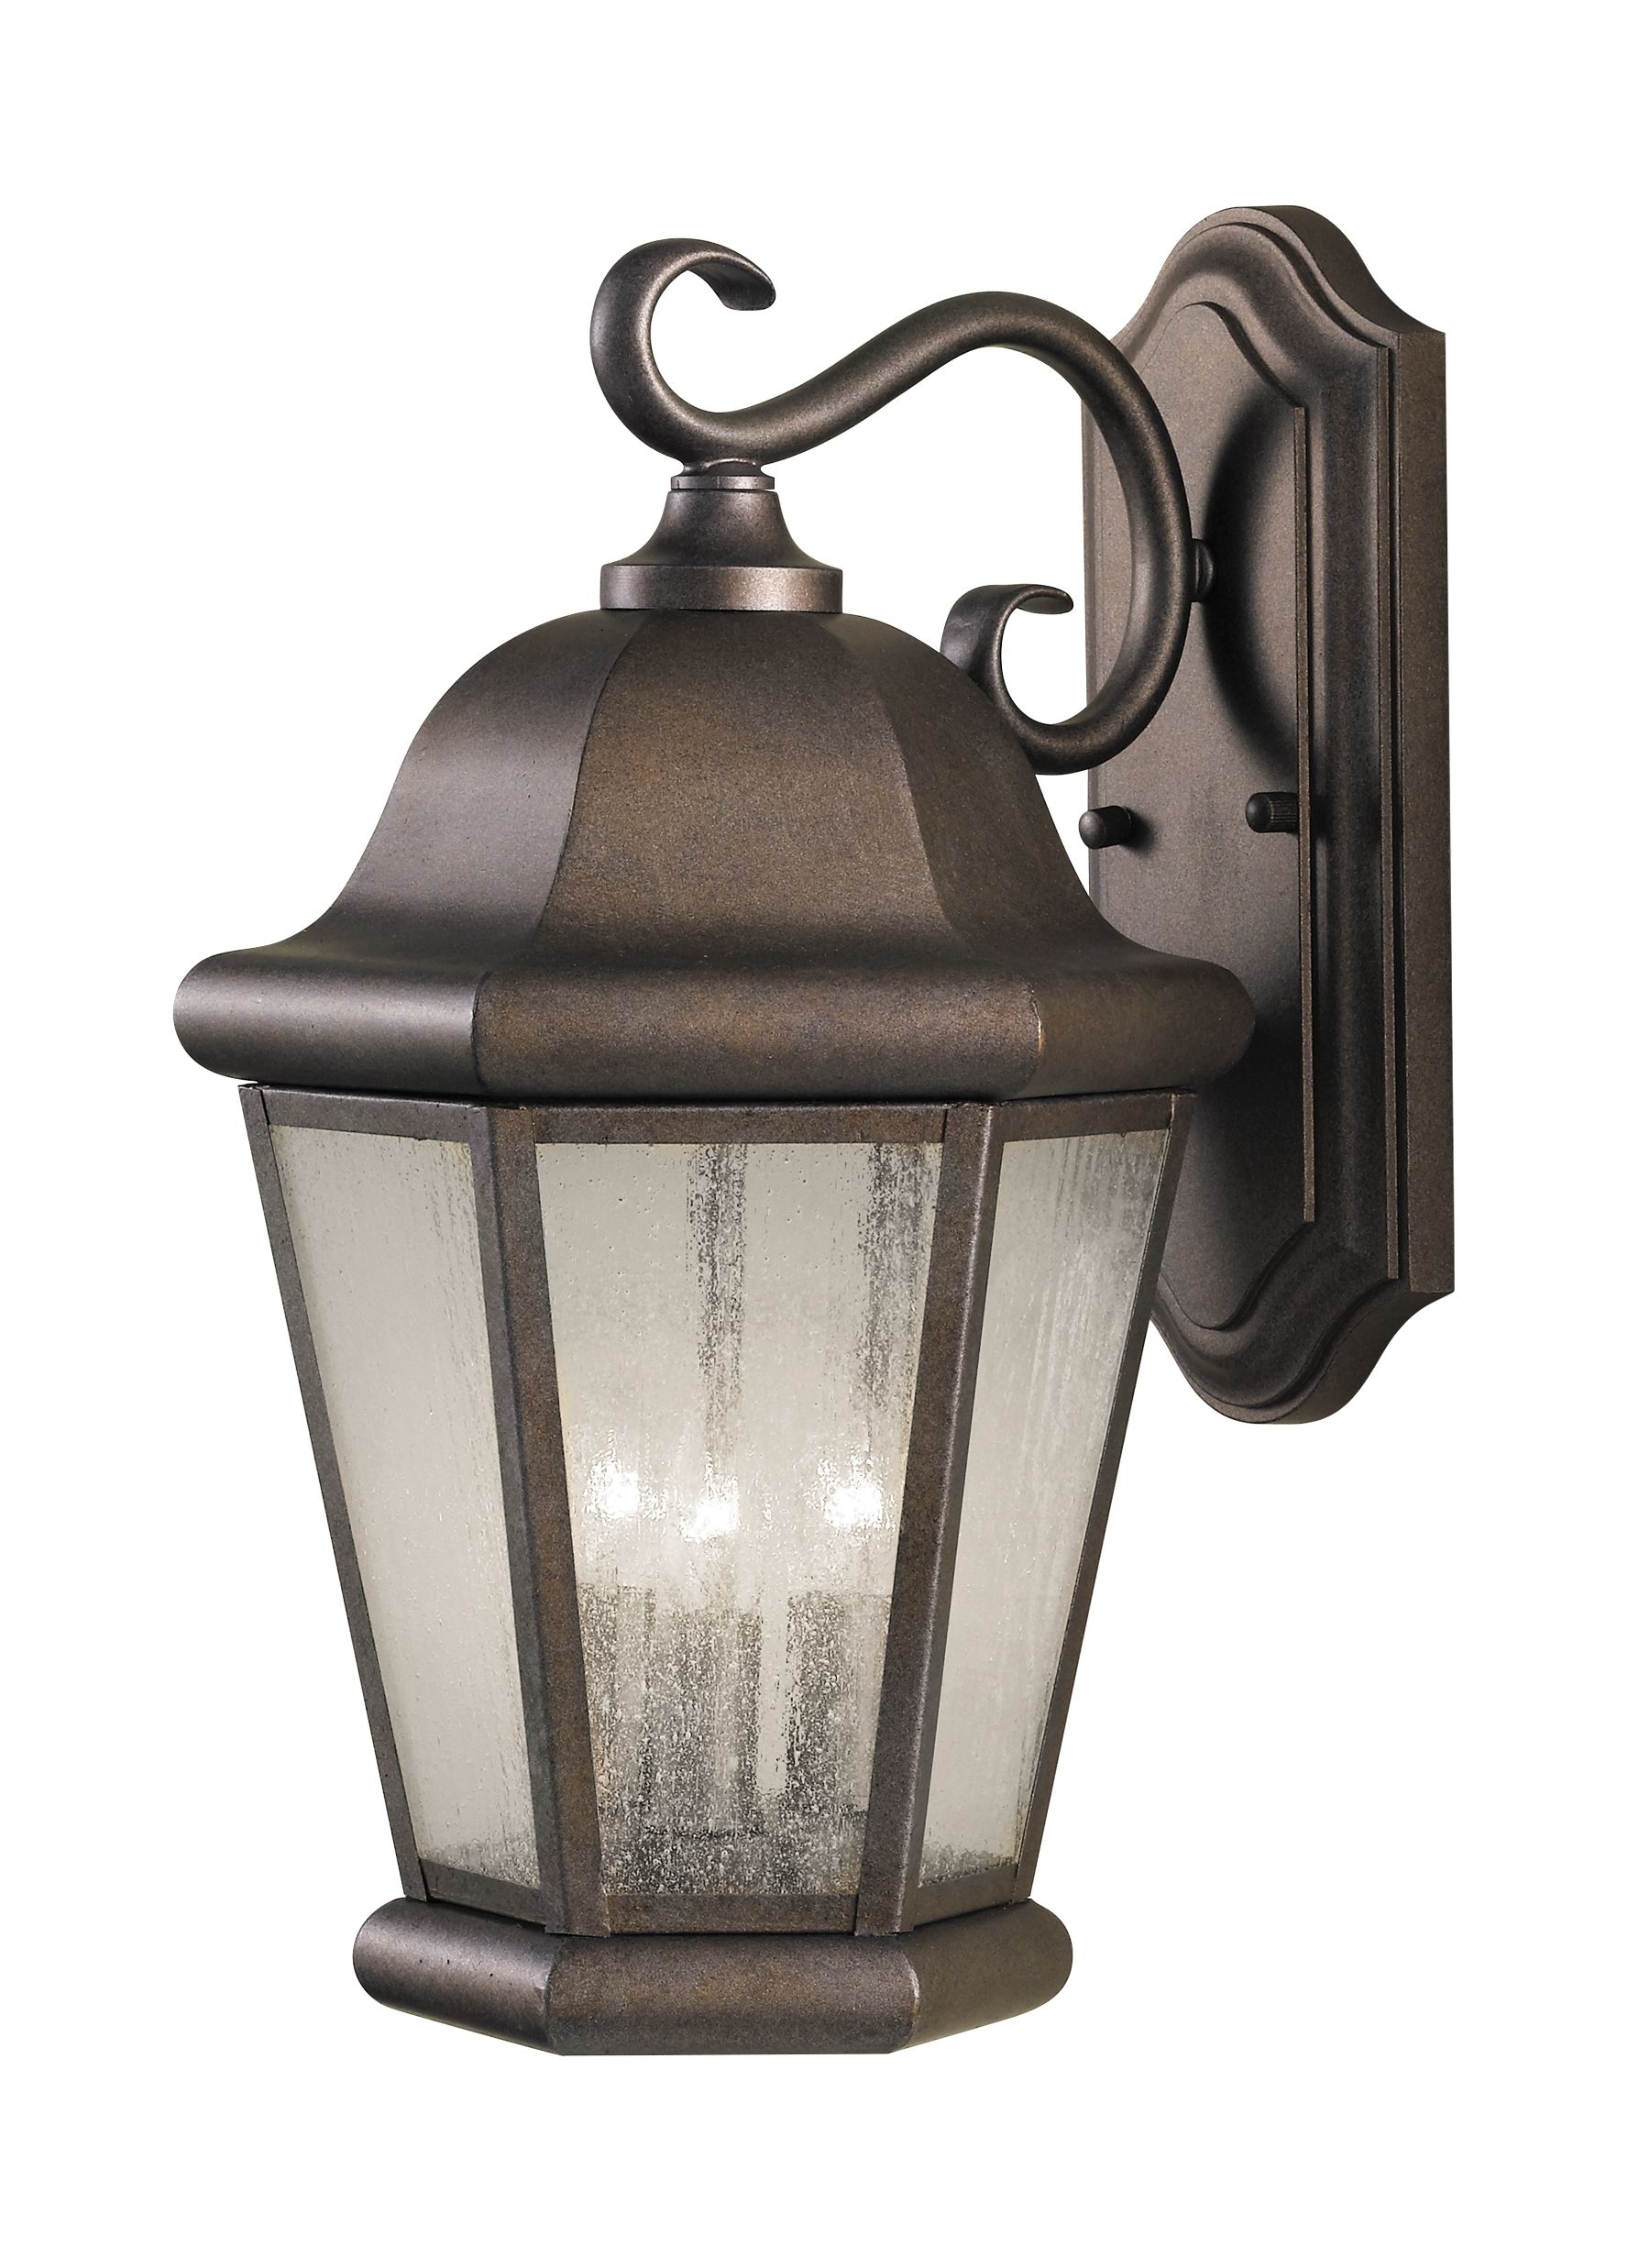 Ol5902cb,3 – Light Wall Lantern,corinthian Bronze Intended For Outdoor Wall Lighting At Houzz (Photo 2 of 15)